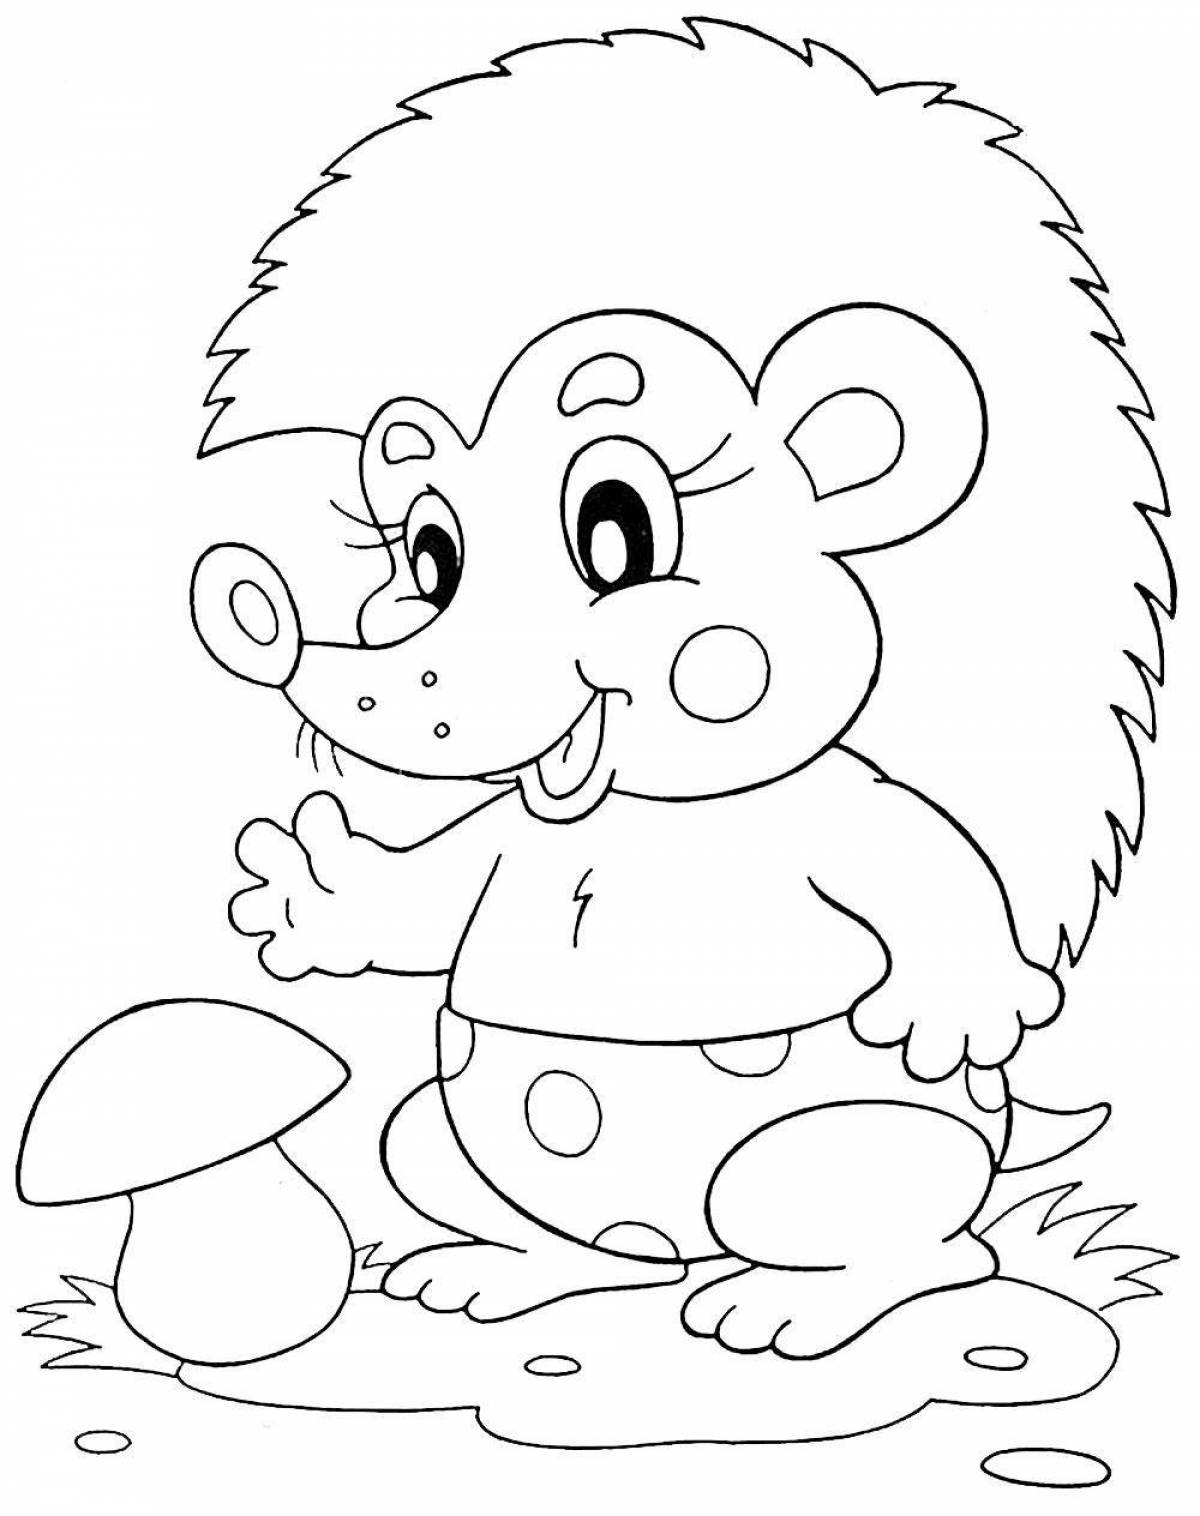 Adorable animal coloring pages for kids